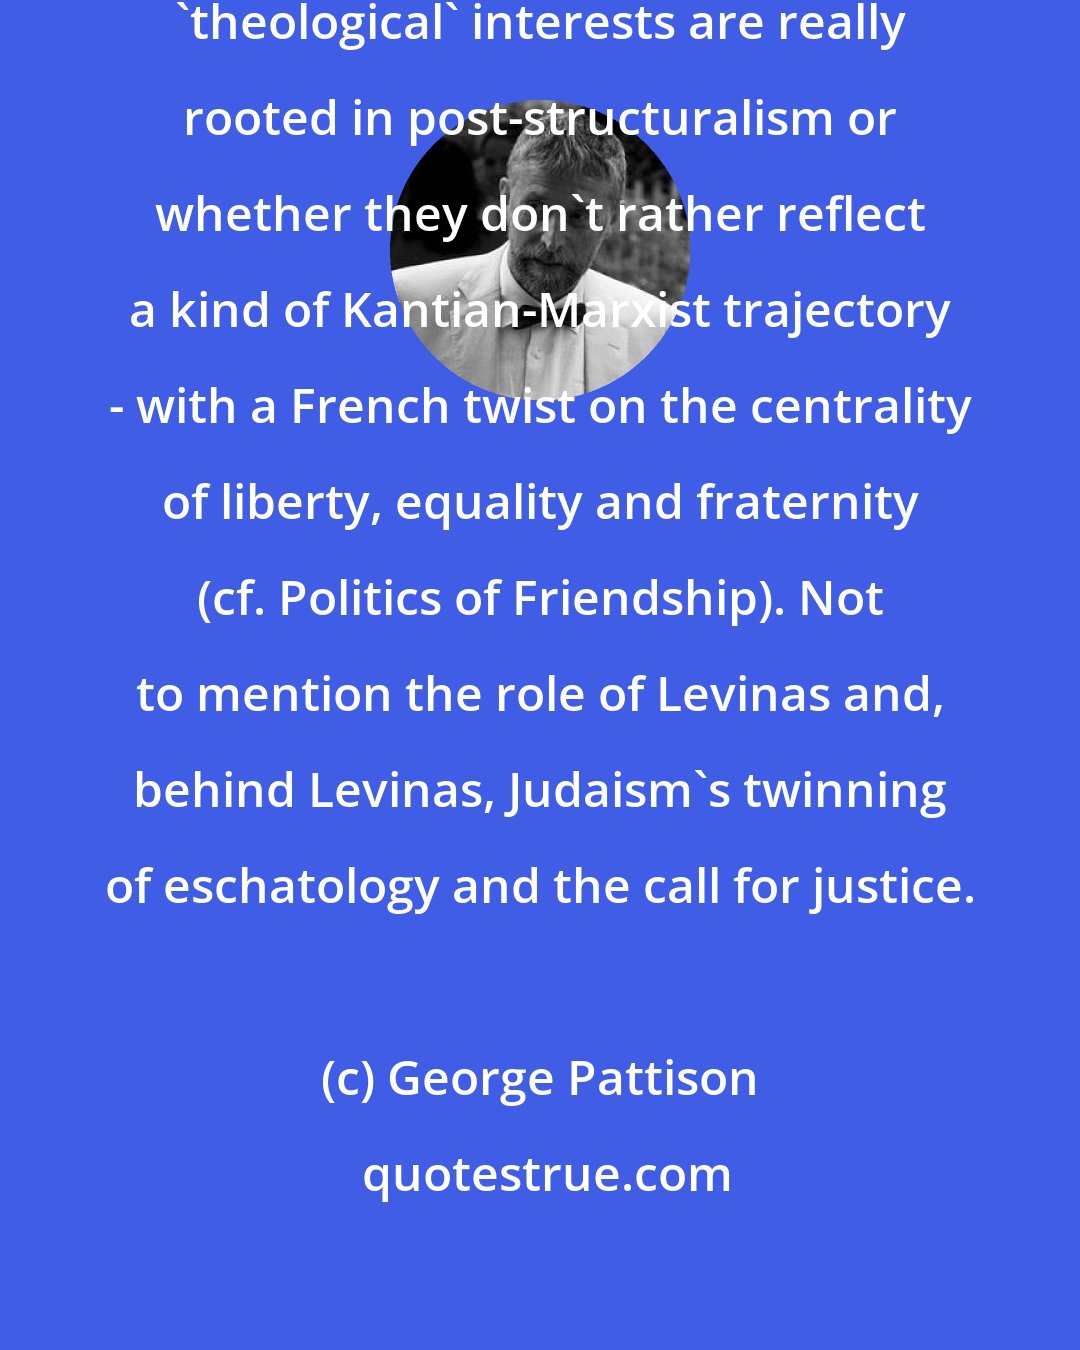 George Pattison: I'm not sure how far Derrida's later 'theological' interests are really rooted in post-structuralism or whether they don't rather reflect a kind of Kantian-Marxist trajectory - with a French twist on the centrality of liberty, equality and fraternity (cf. Politics of Friendship). Not to mention the role of Levinas and, behind Levinas, Judaism's twinning of eschatology and the call for justice.